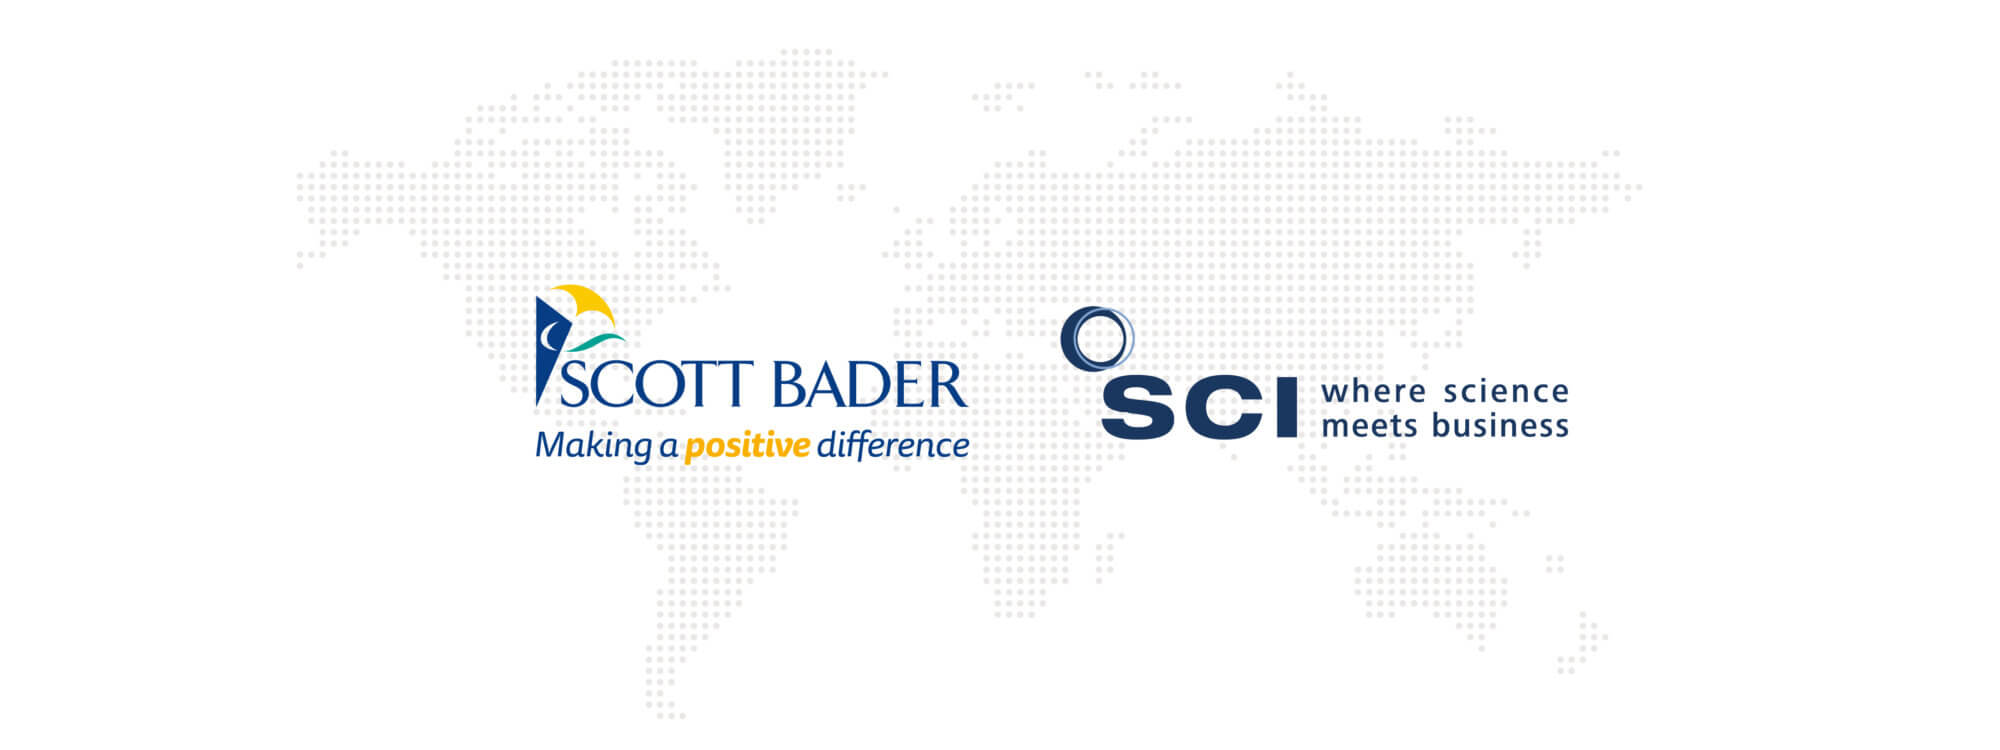 Scott Bader joins SCI as a Corporate Partner